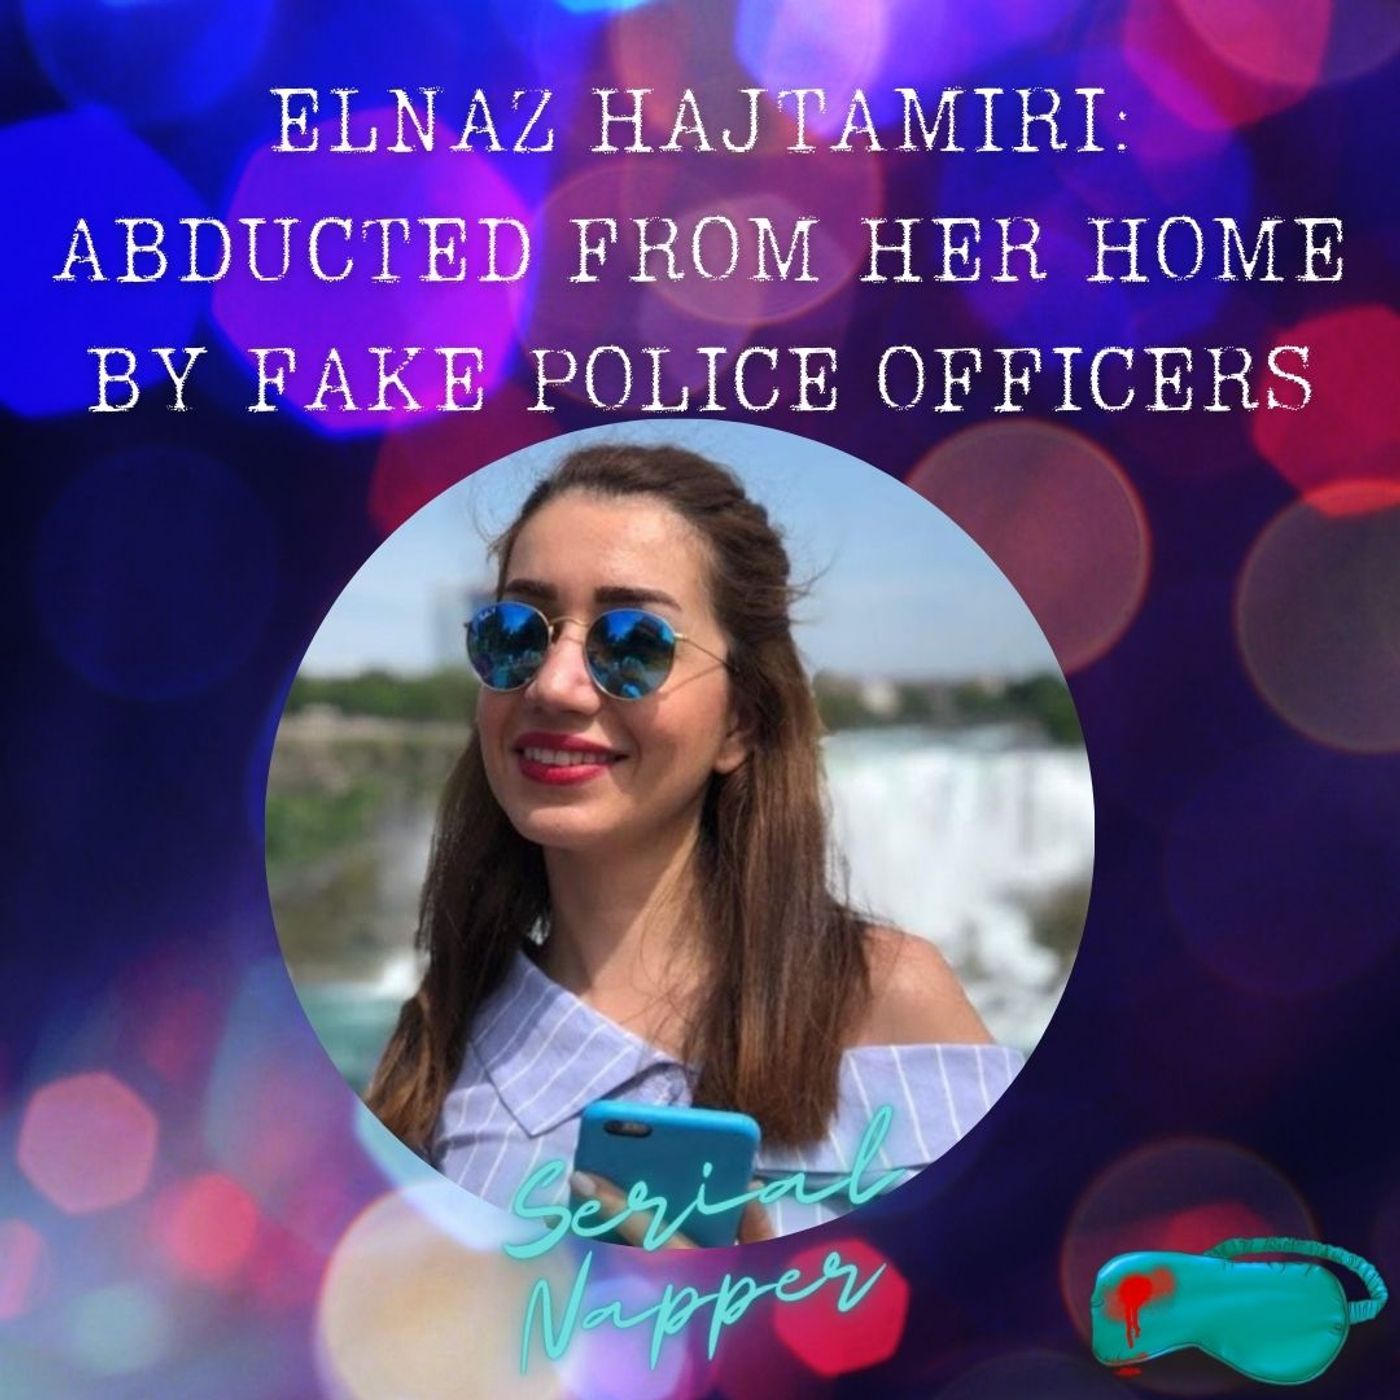 Elnaz Hajtamiri - Abducted From Her Home by Fake Police Officers by Serial Napper